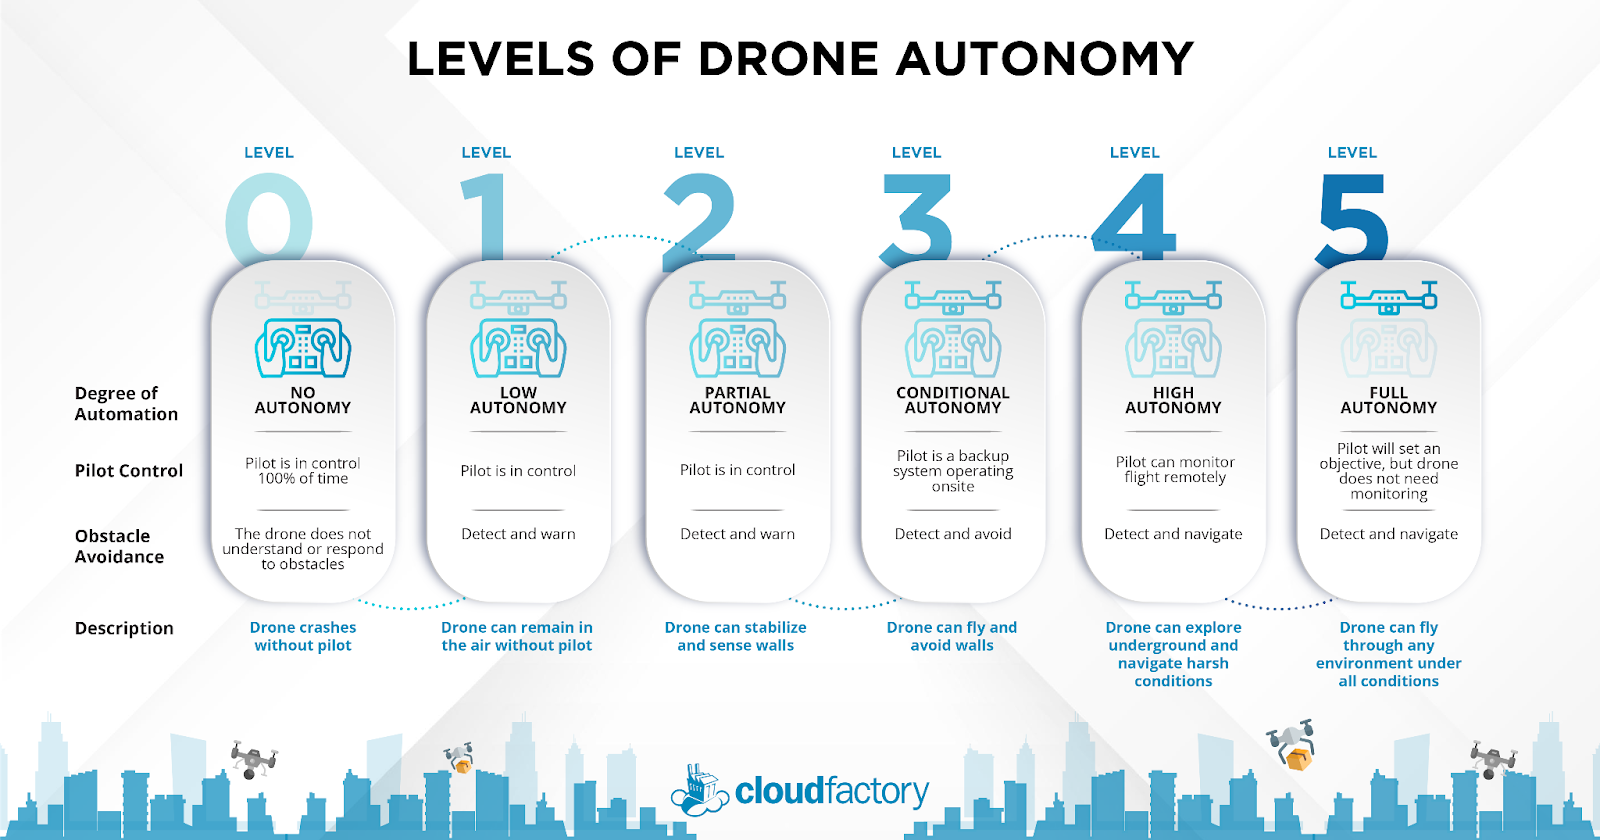 The demand for autonomy in unmanned aircraft systems (UAS), commonly referred to as drones, is rapidly increasing. See how CloudFactory defines the levels of drone autonomy and how each level changes for drone pilots and obstacle avoidance. Read explanations on our blog.